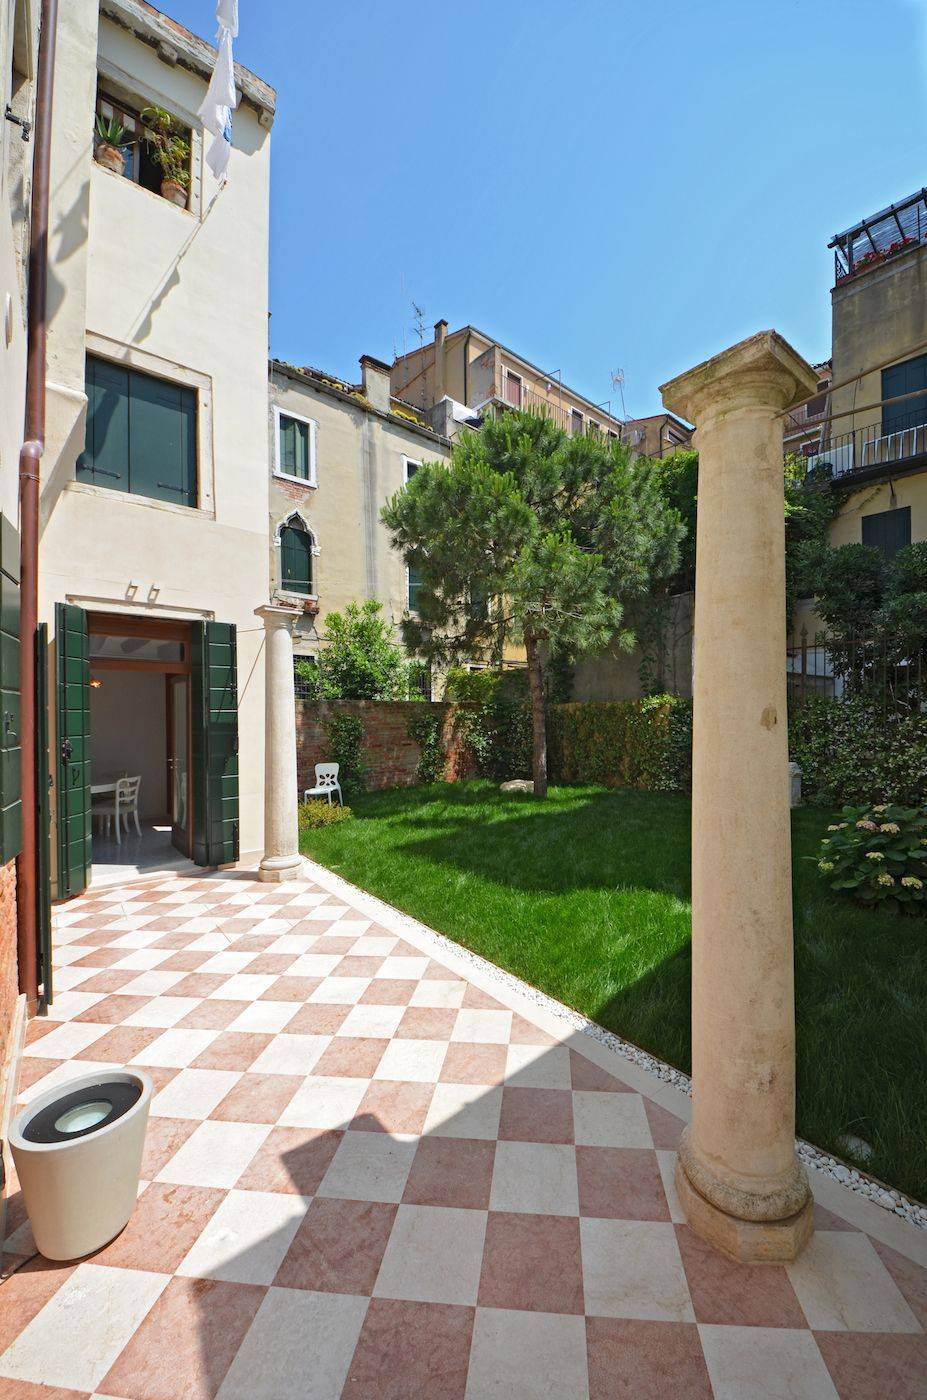 access to the Palladio Garden apartment from the shared garden